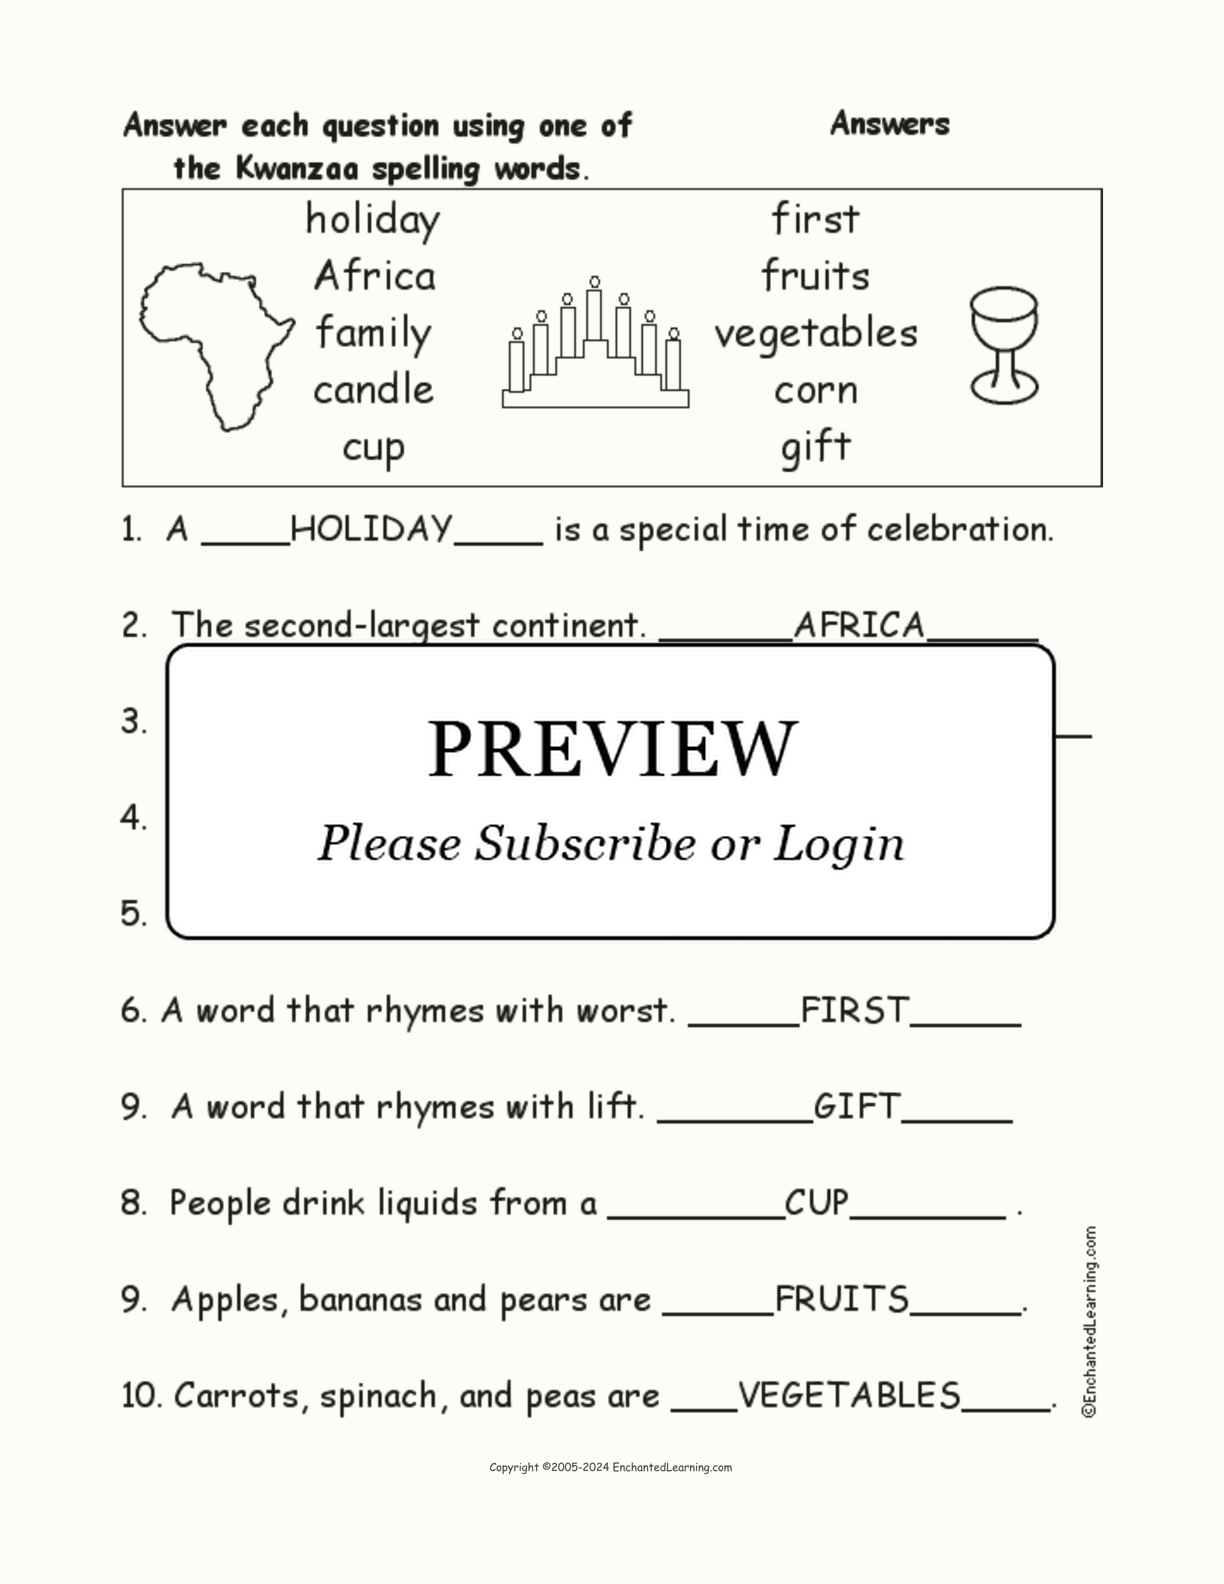 Kwanzaa Spelling Word Questions interactive worksheet page 2